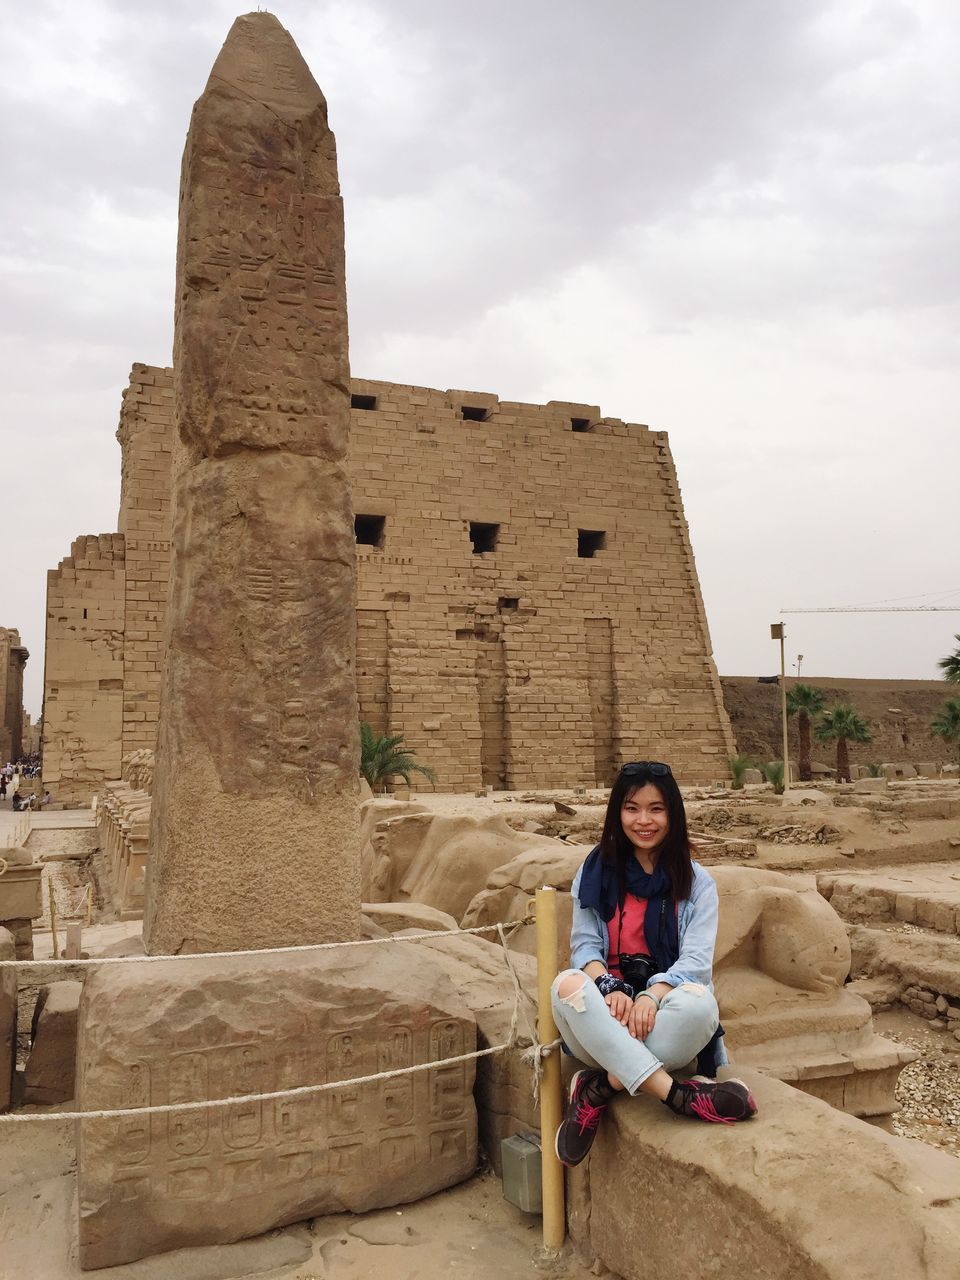 lifestyles, young adult, leisure activity, architecture, person, built structure, building exterior, casual clothing, full length, history, sky, young women, old ruin, looking at camera, sitting, smiling, standing